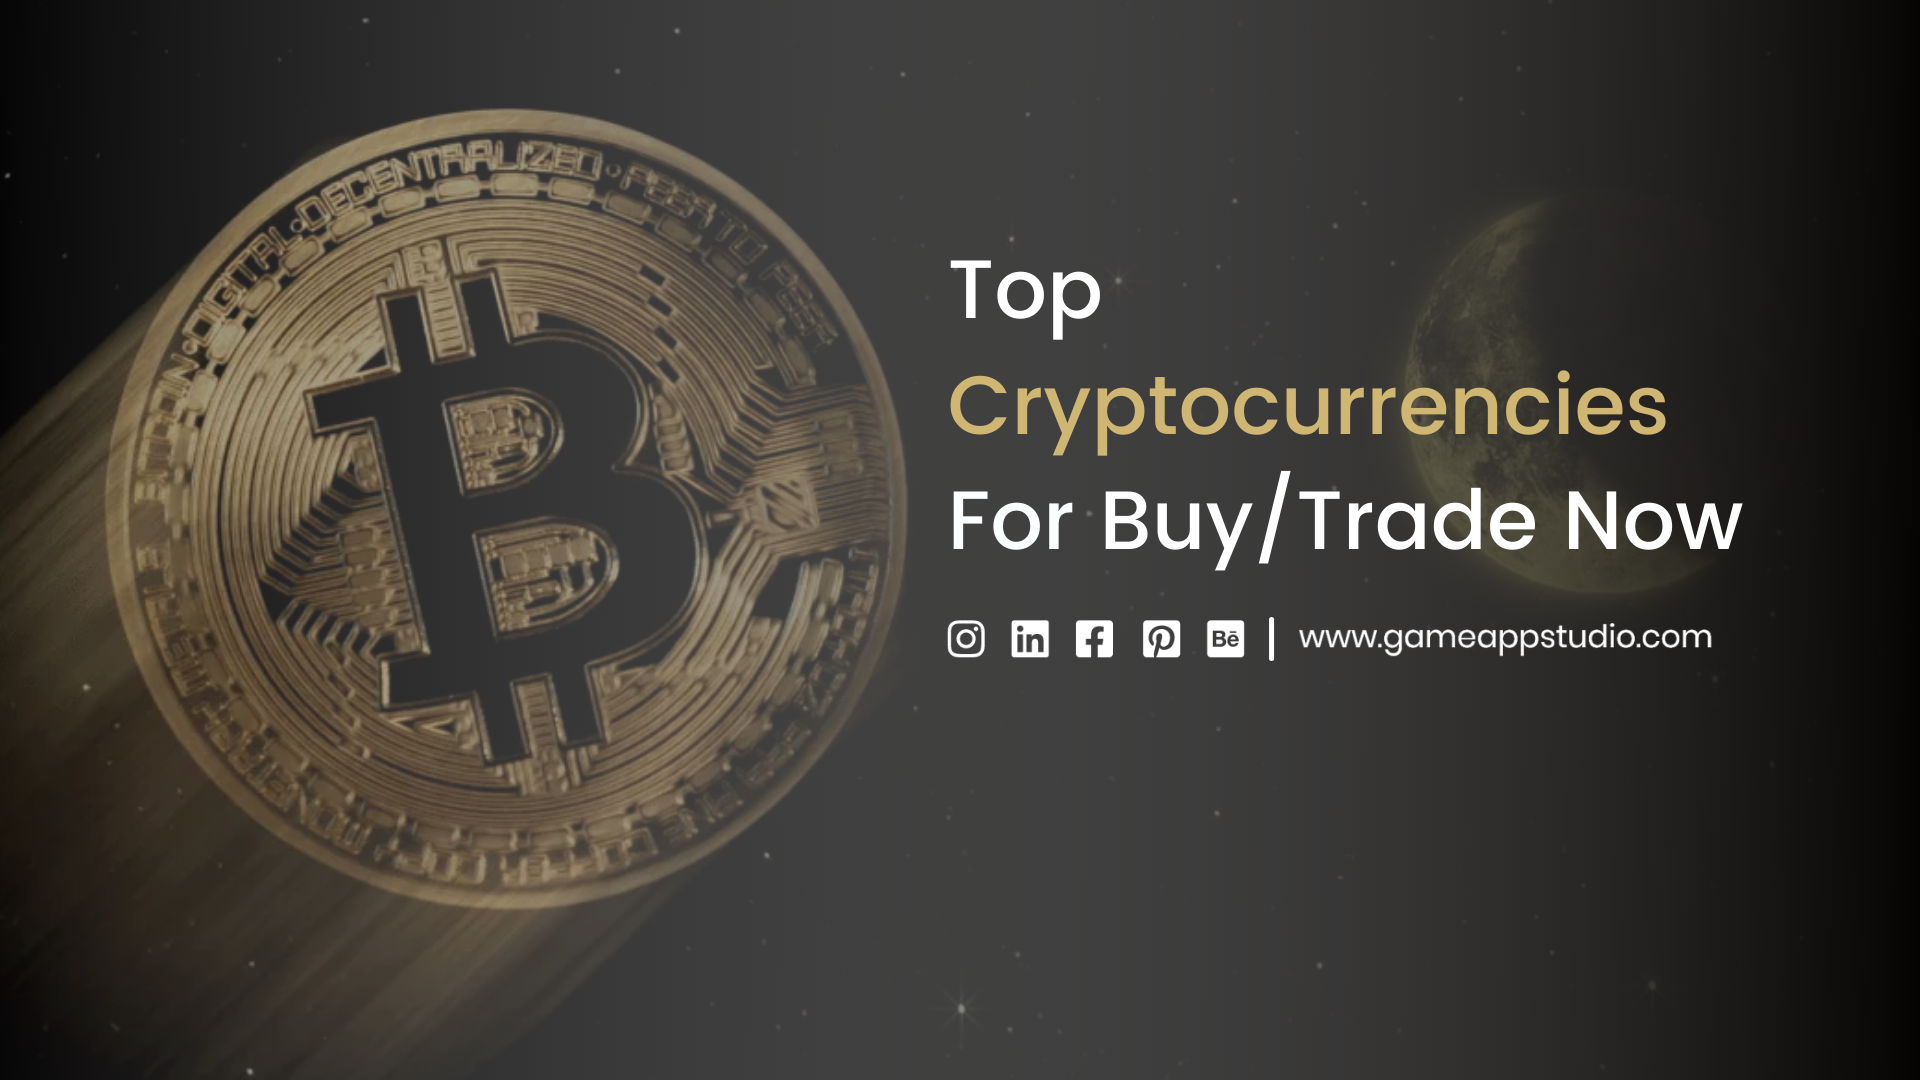 Top Cryptocurrencies For Buy/Trade Now